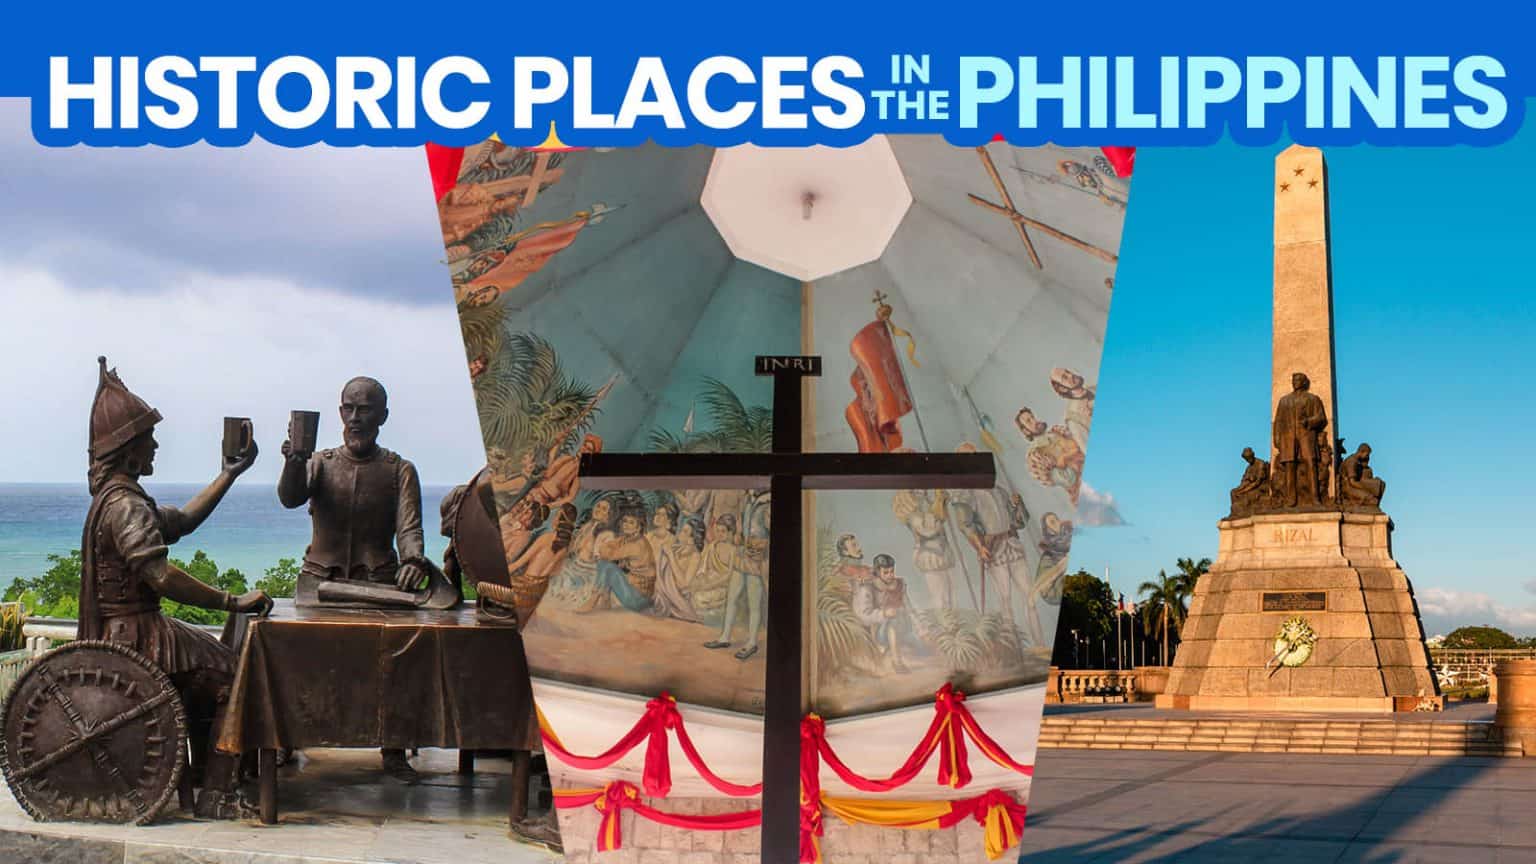 25 HISTORICAL PLACES IN THE PHILIPPINES in Araling Panlipunan / HEKASI